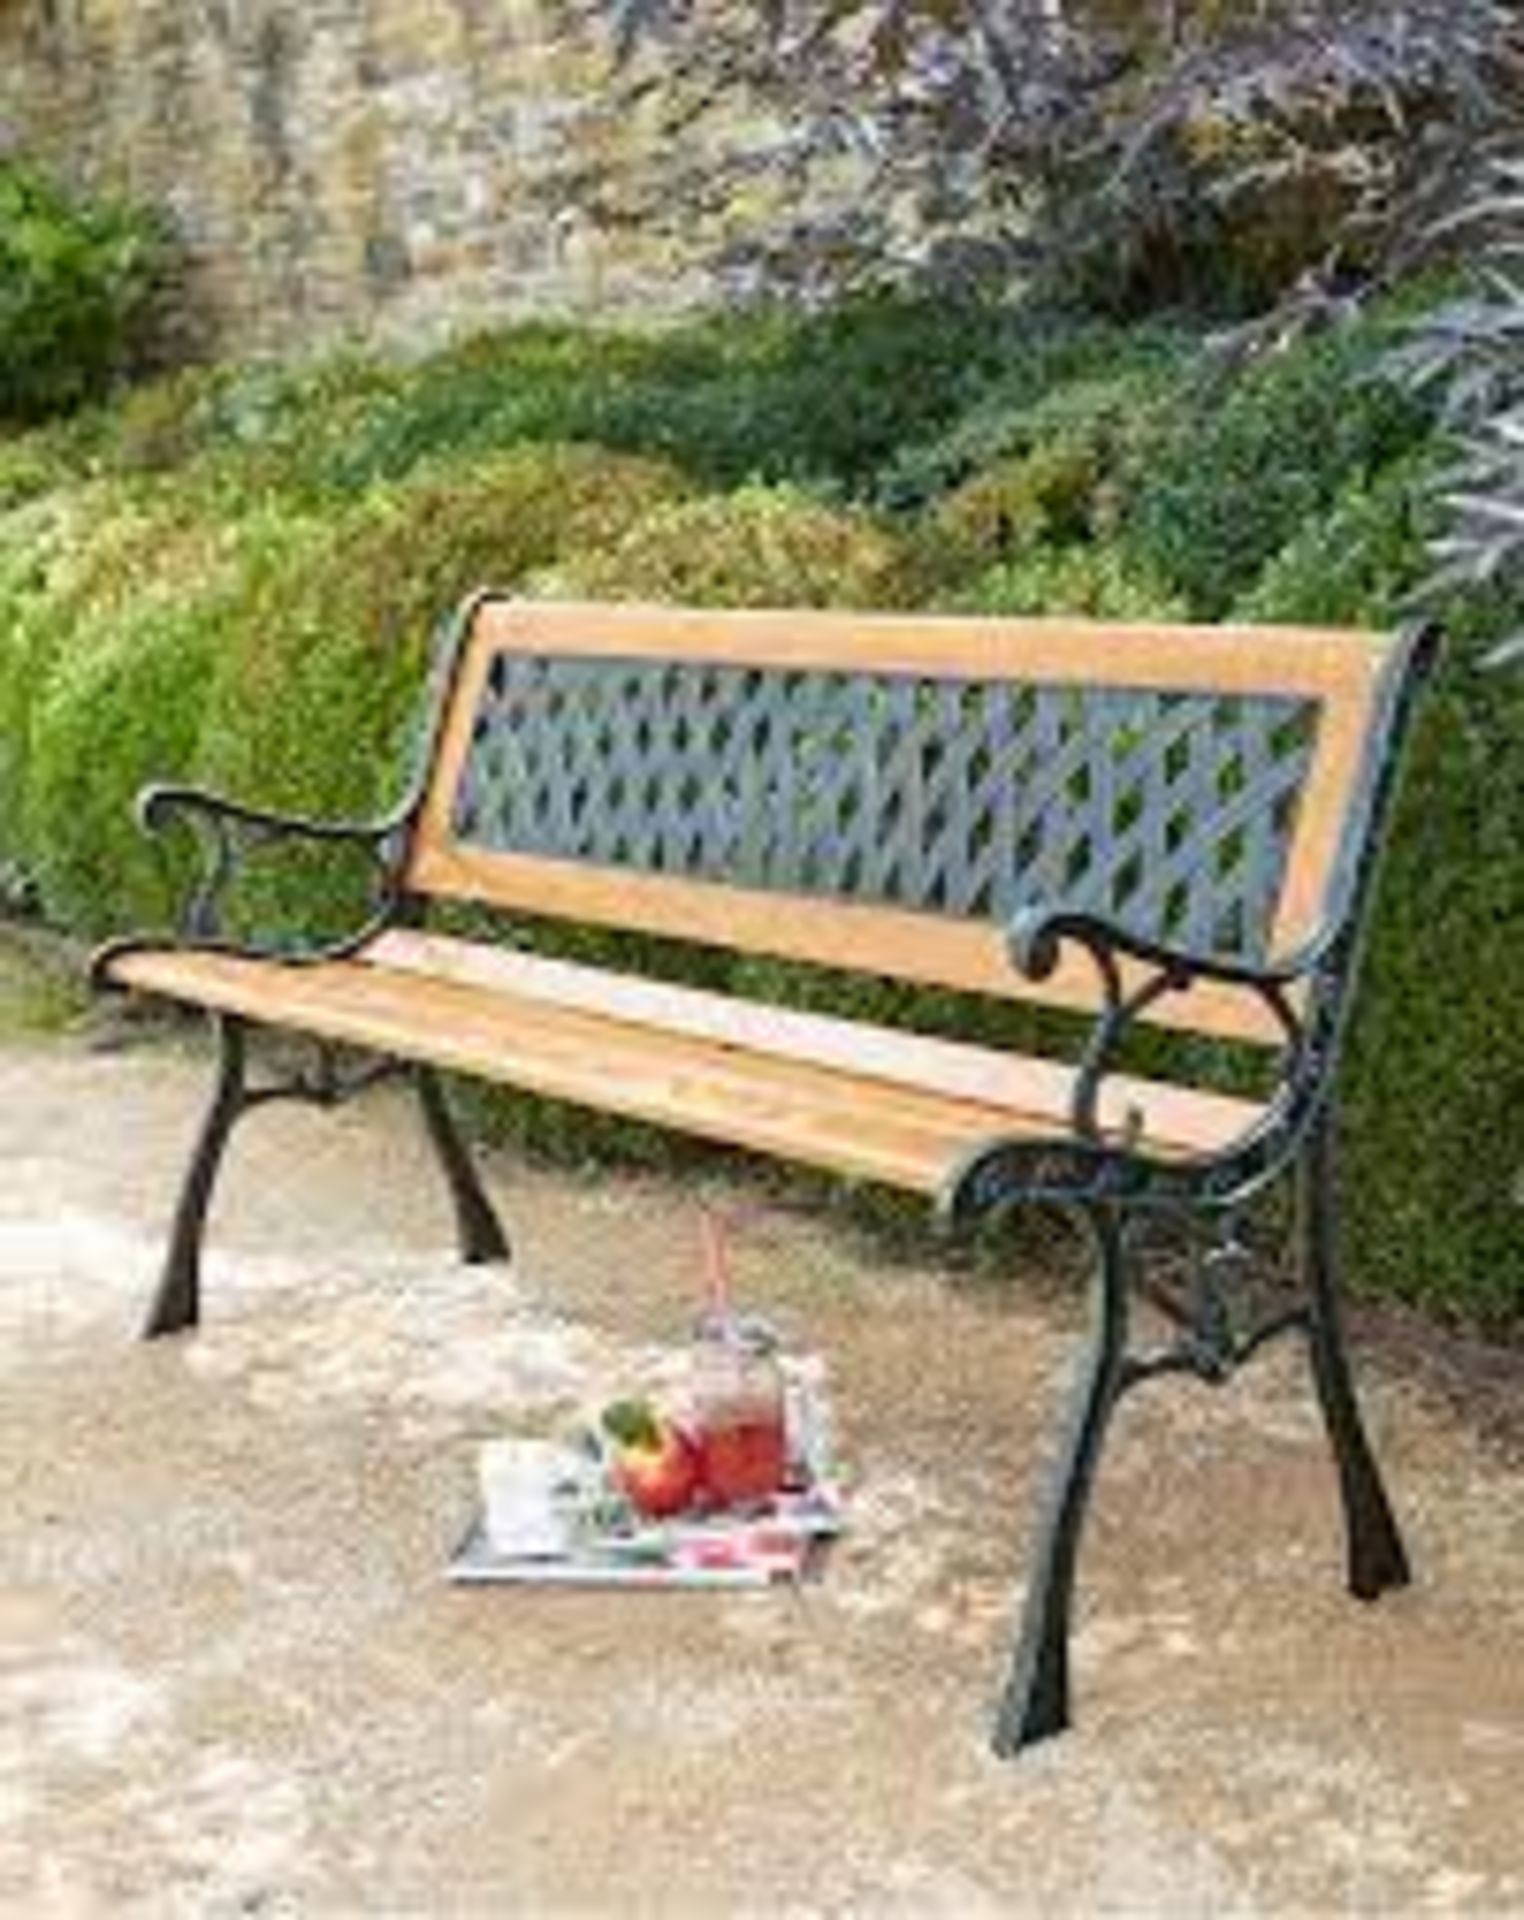 (REF118288) Lacy Bench RRP 133.5